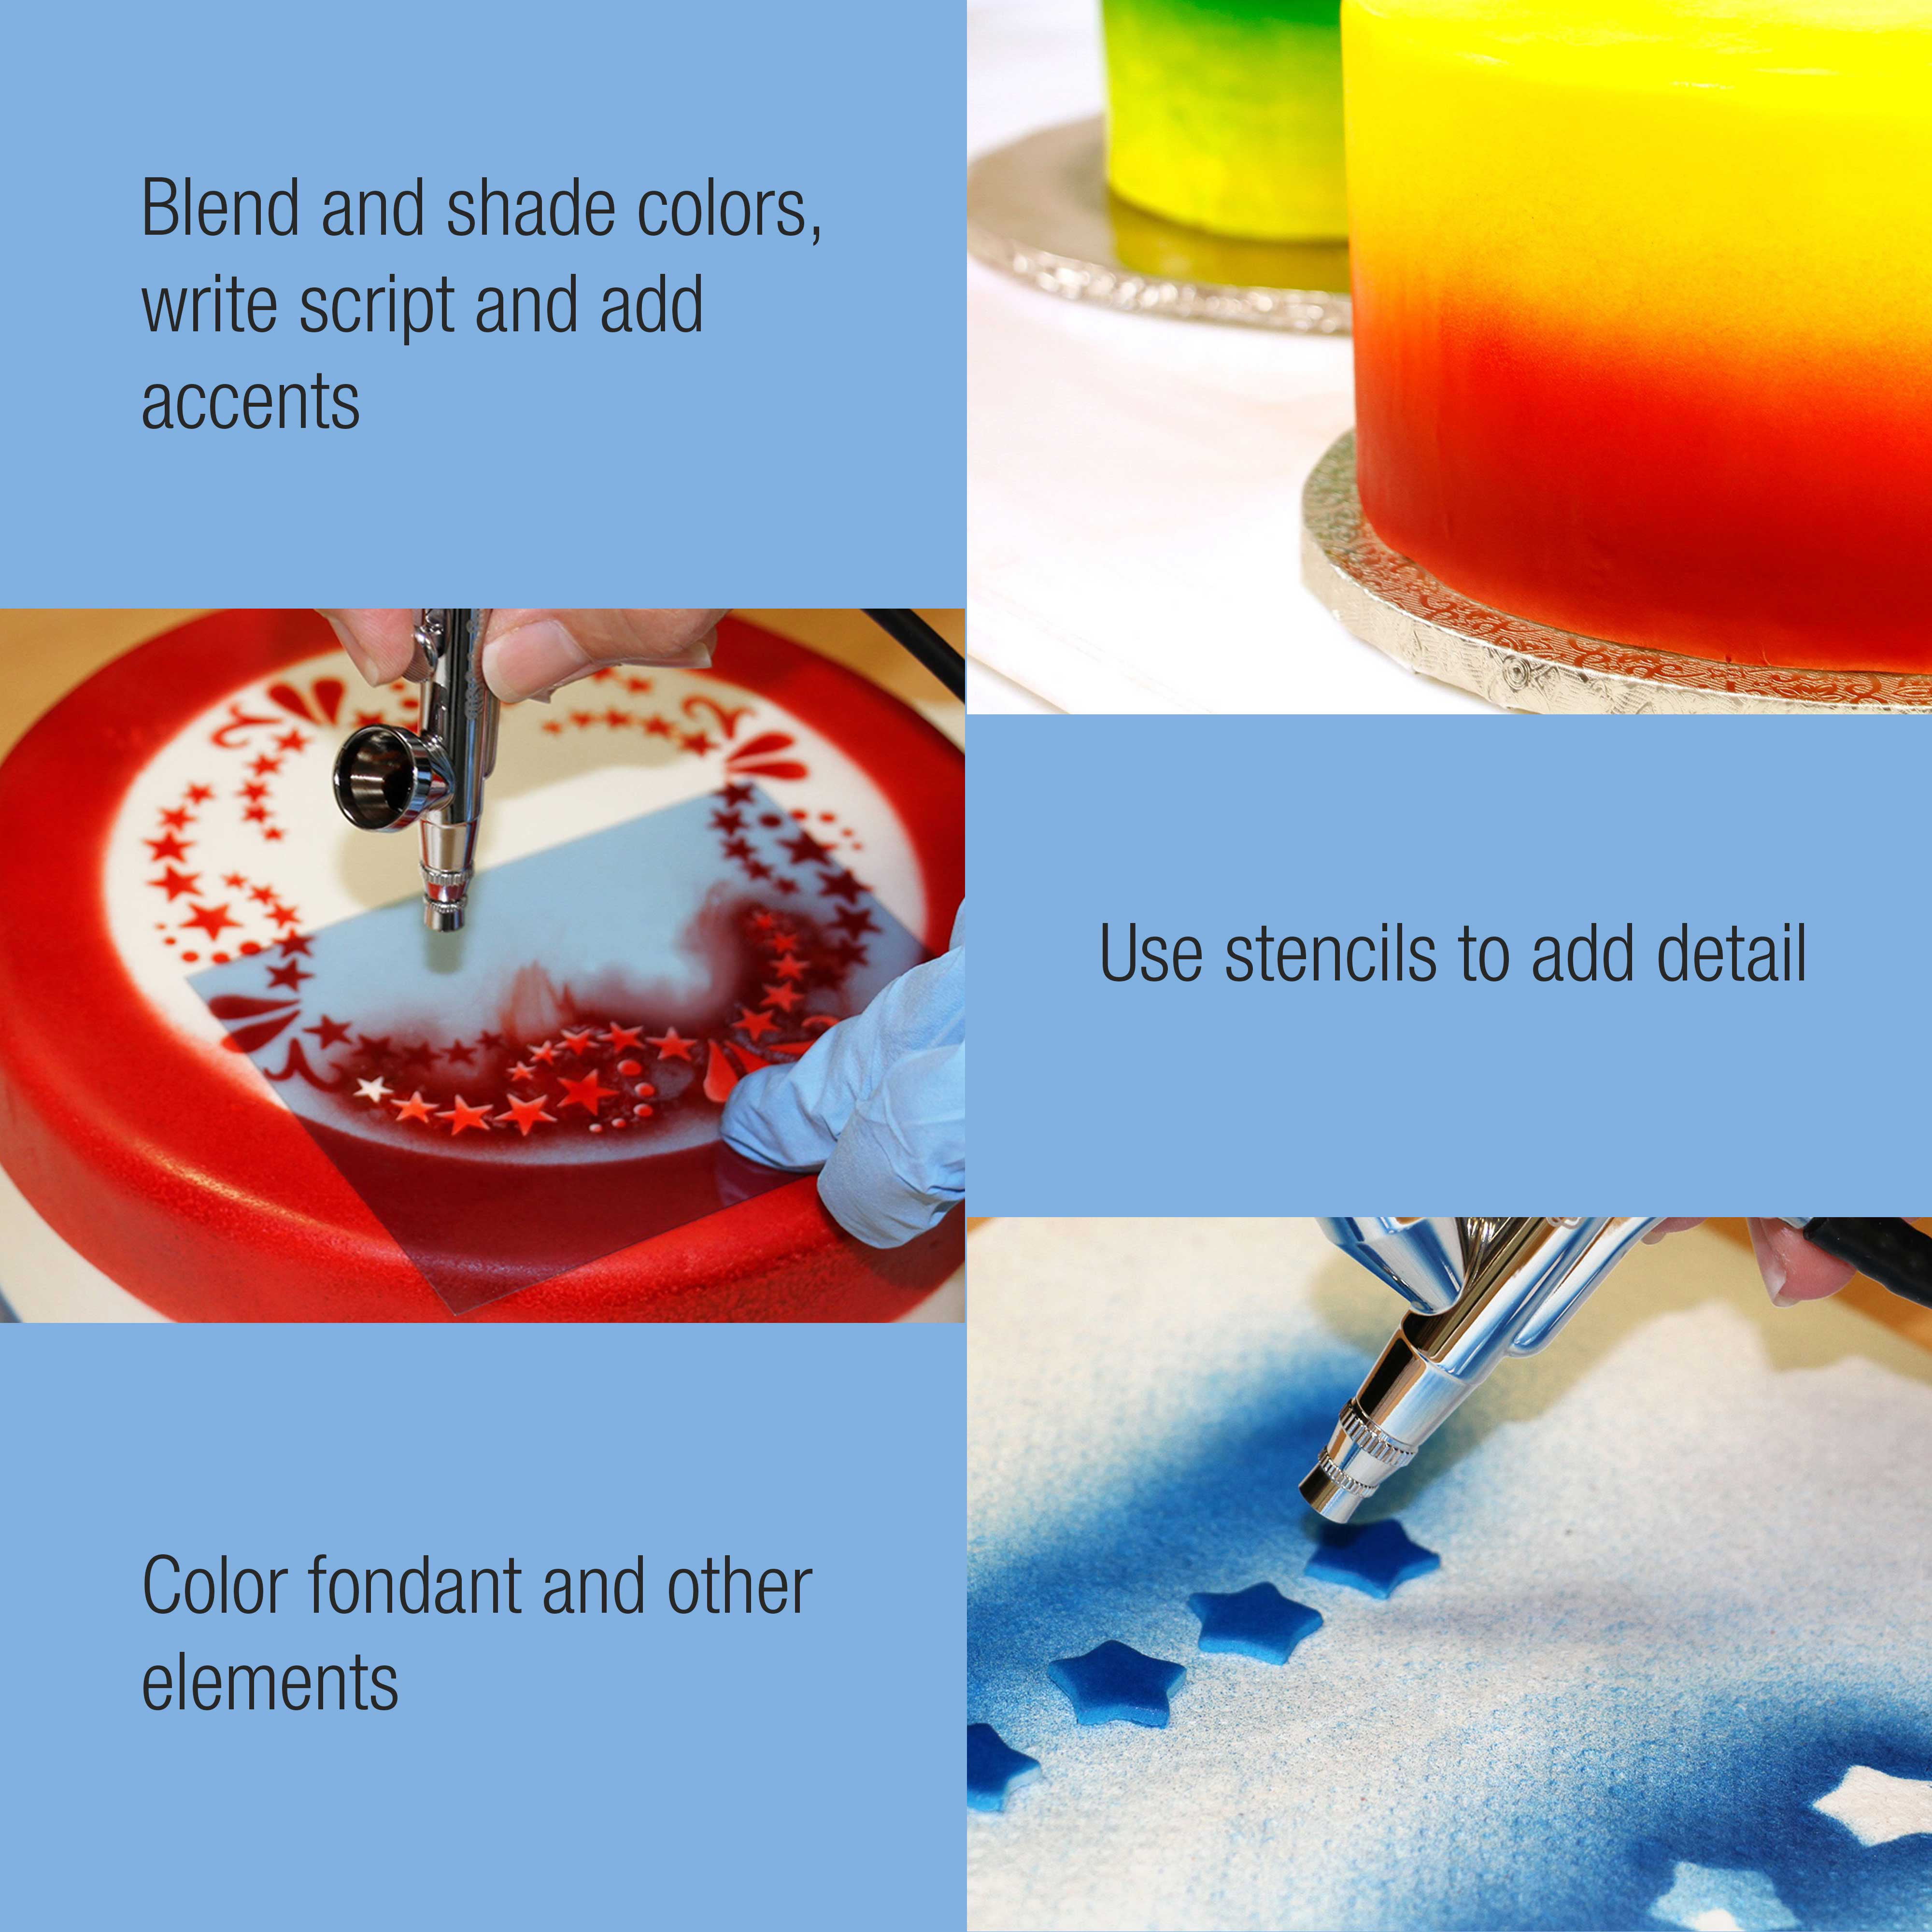  Cake Airbrush Decorating Kit with Compressor: Futebo Cookie  Airbrush Kit with 24 Vivid Airbrush Liquid Food Colors, Decorate Cakes,  Desserts or Other Baking Food(Color: White) : Arts, Crafts & Sewing